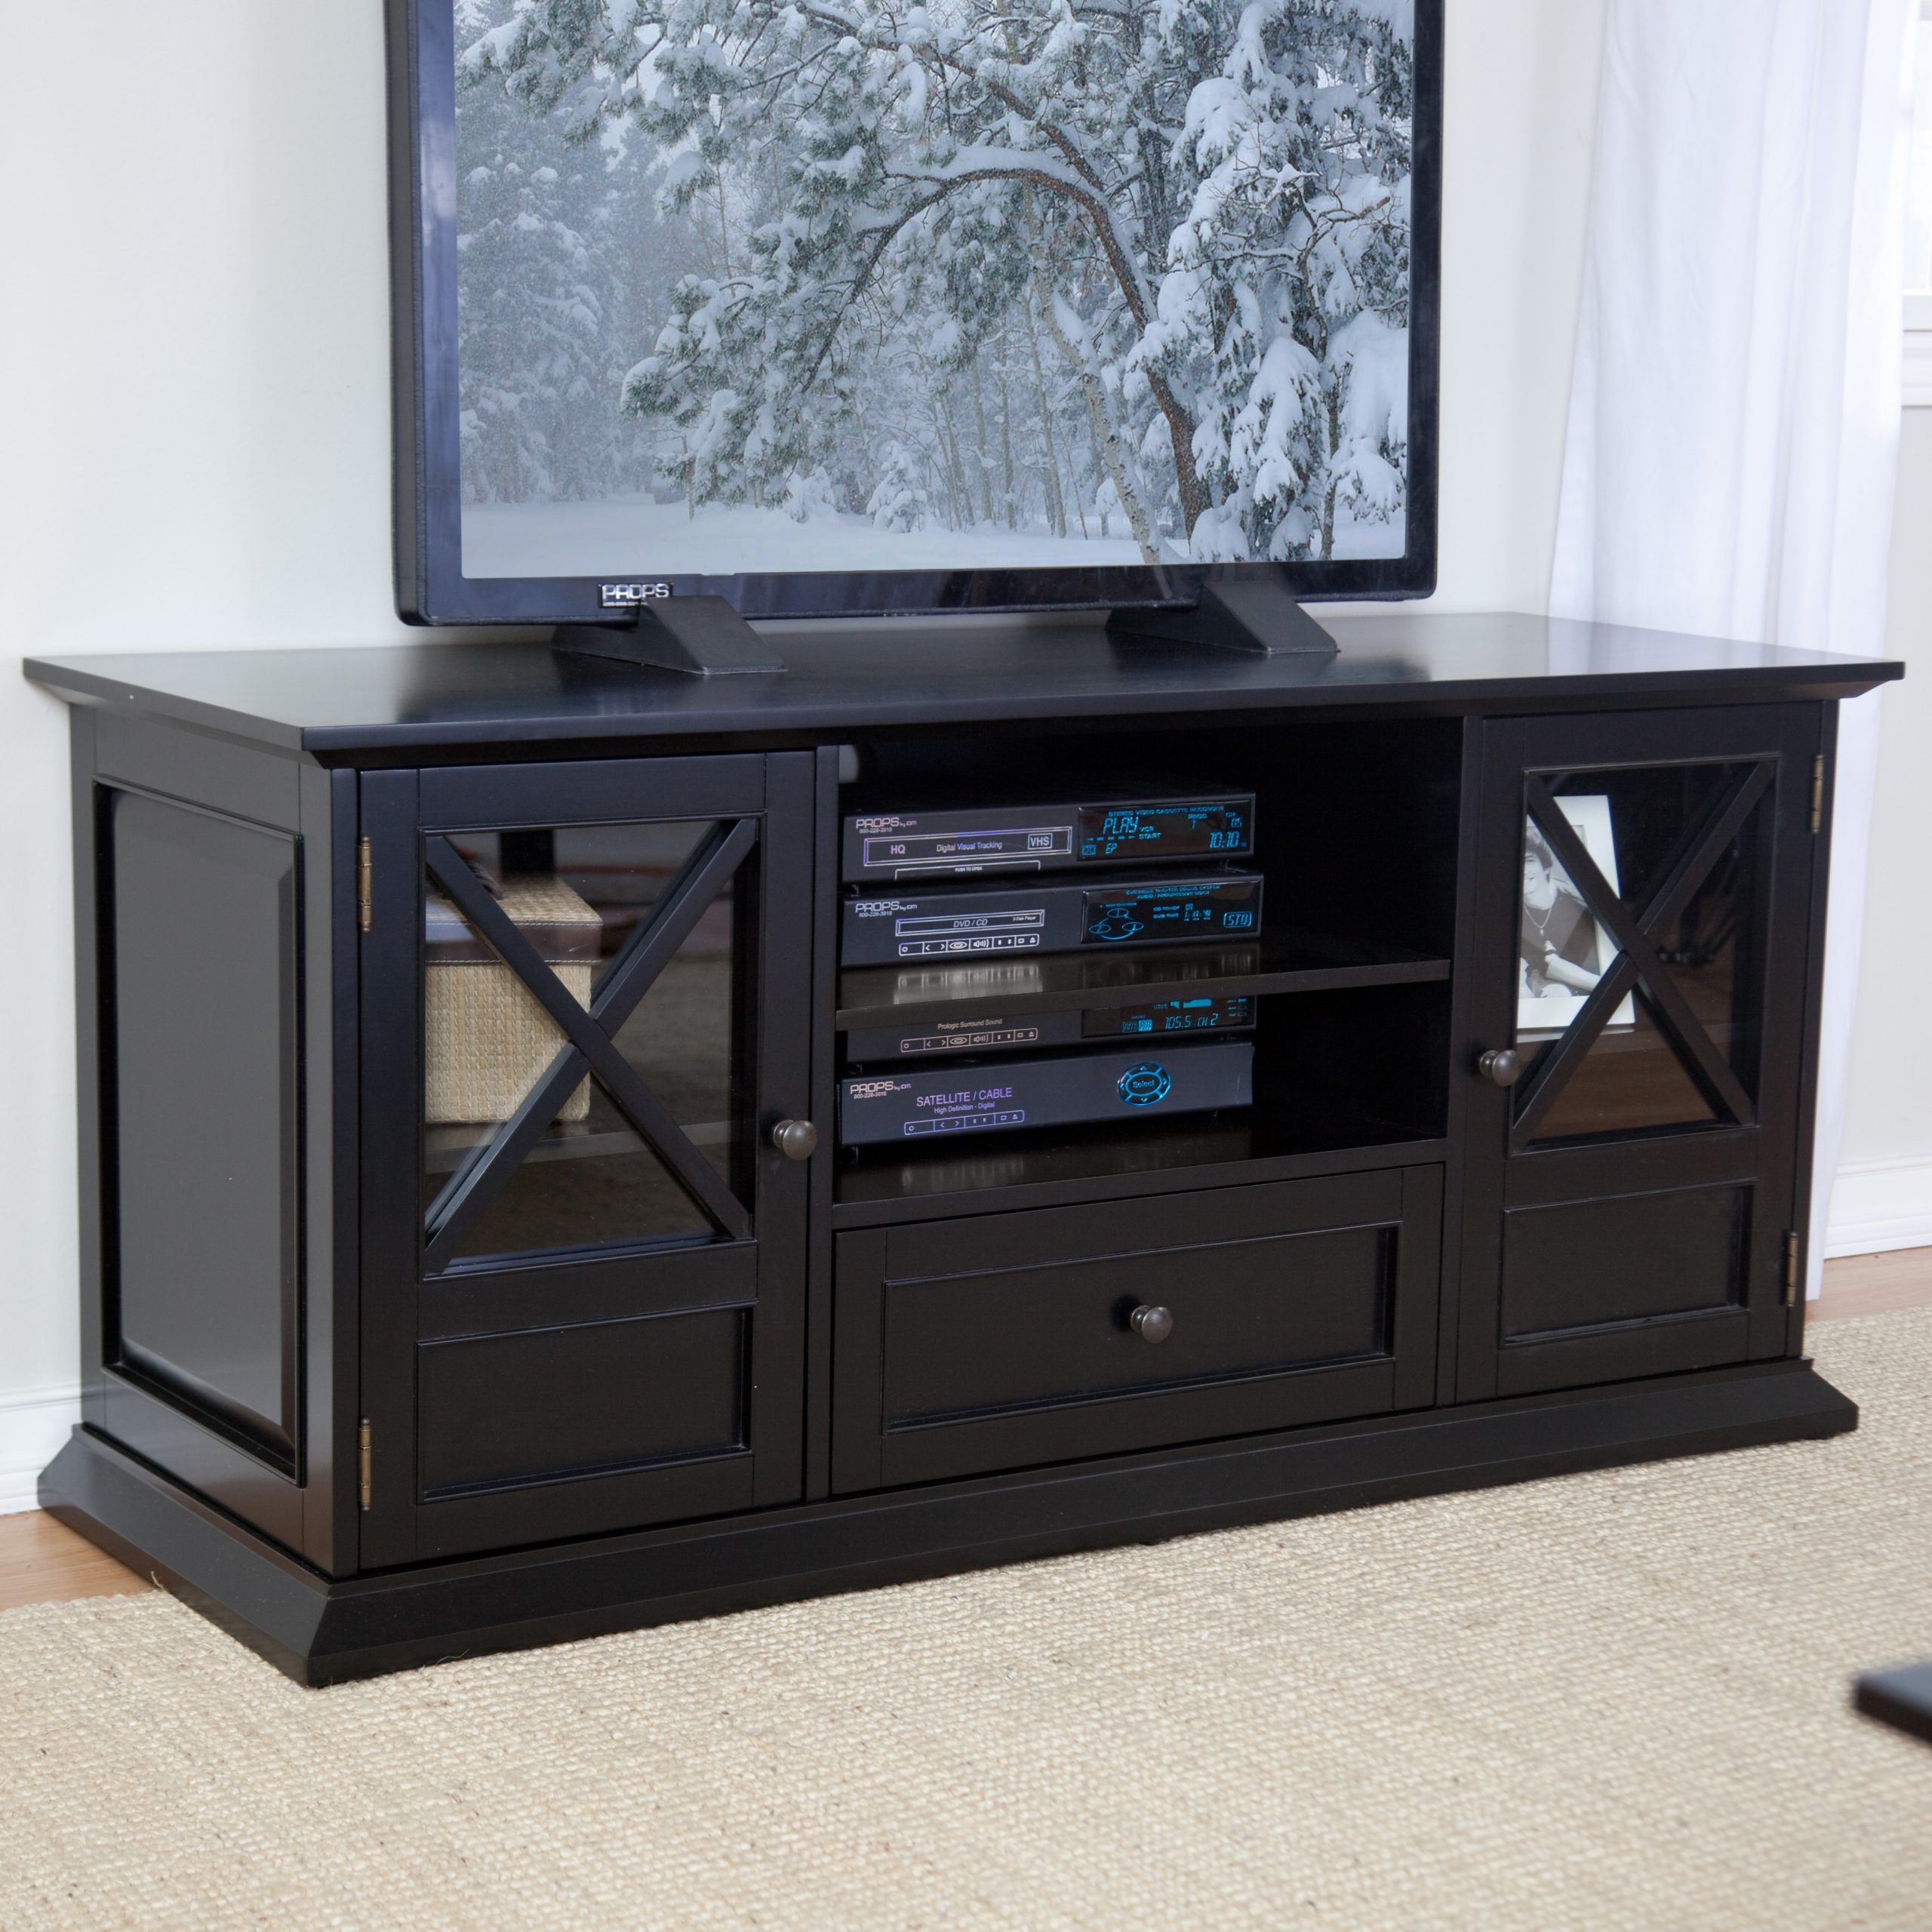 Belham Living Hampton 55 Inch Tv Stand – Black At Hayneedle Inside Greenwich Wide Tv Stands (Photo 4 of 15)